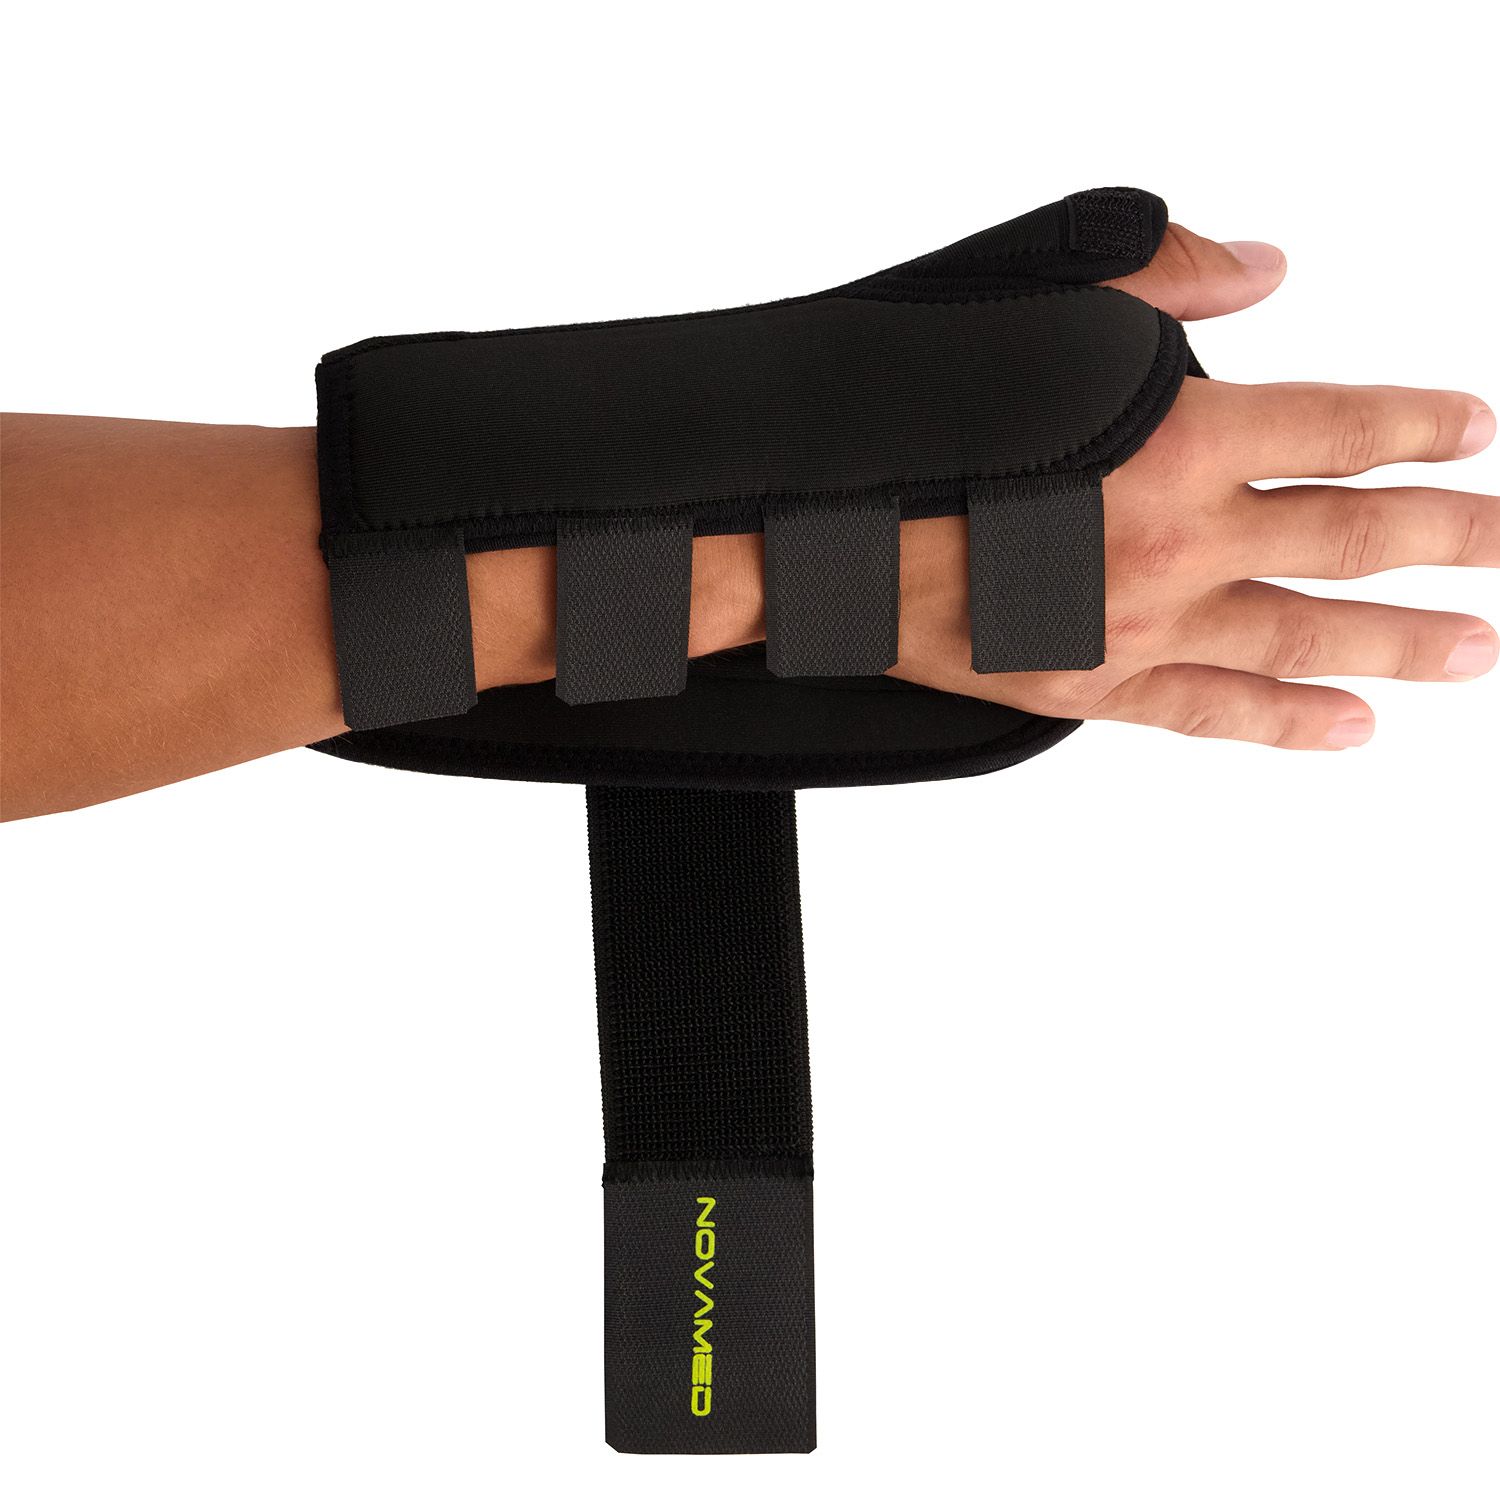 novamed thumb support wrist splint with hand held up